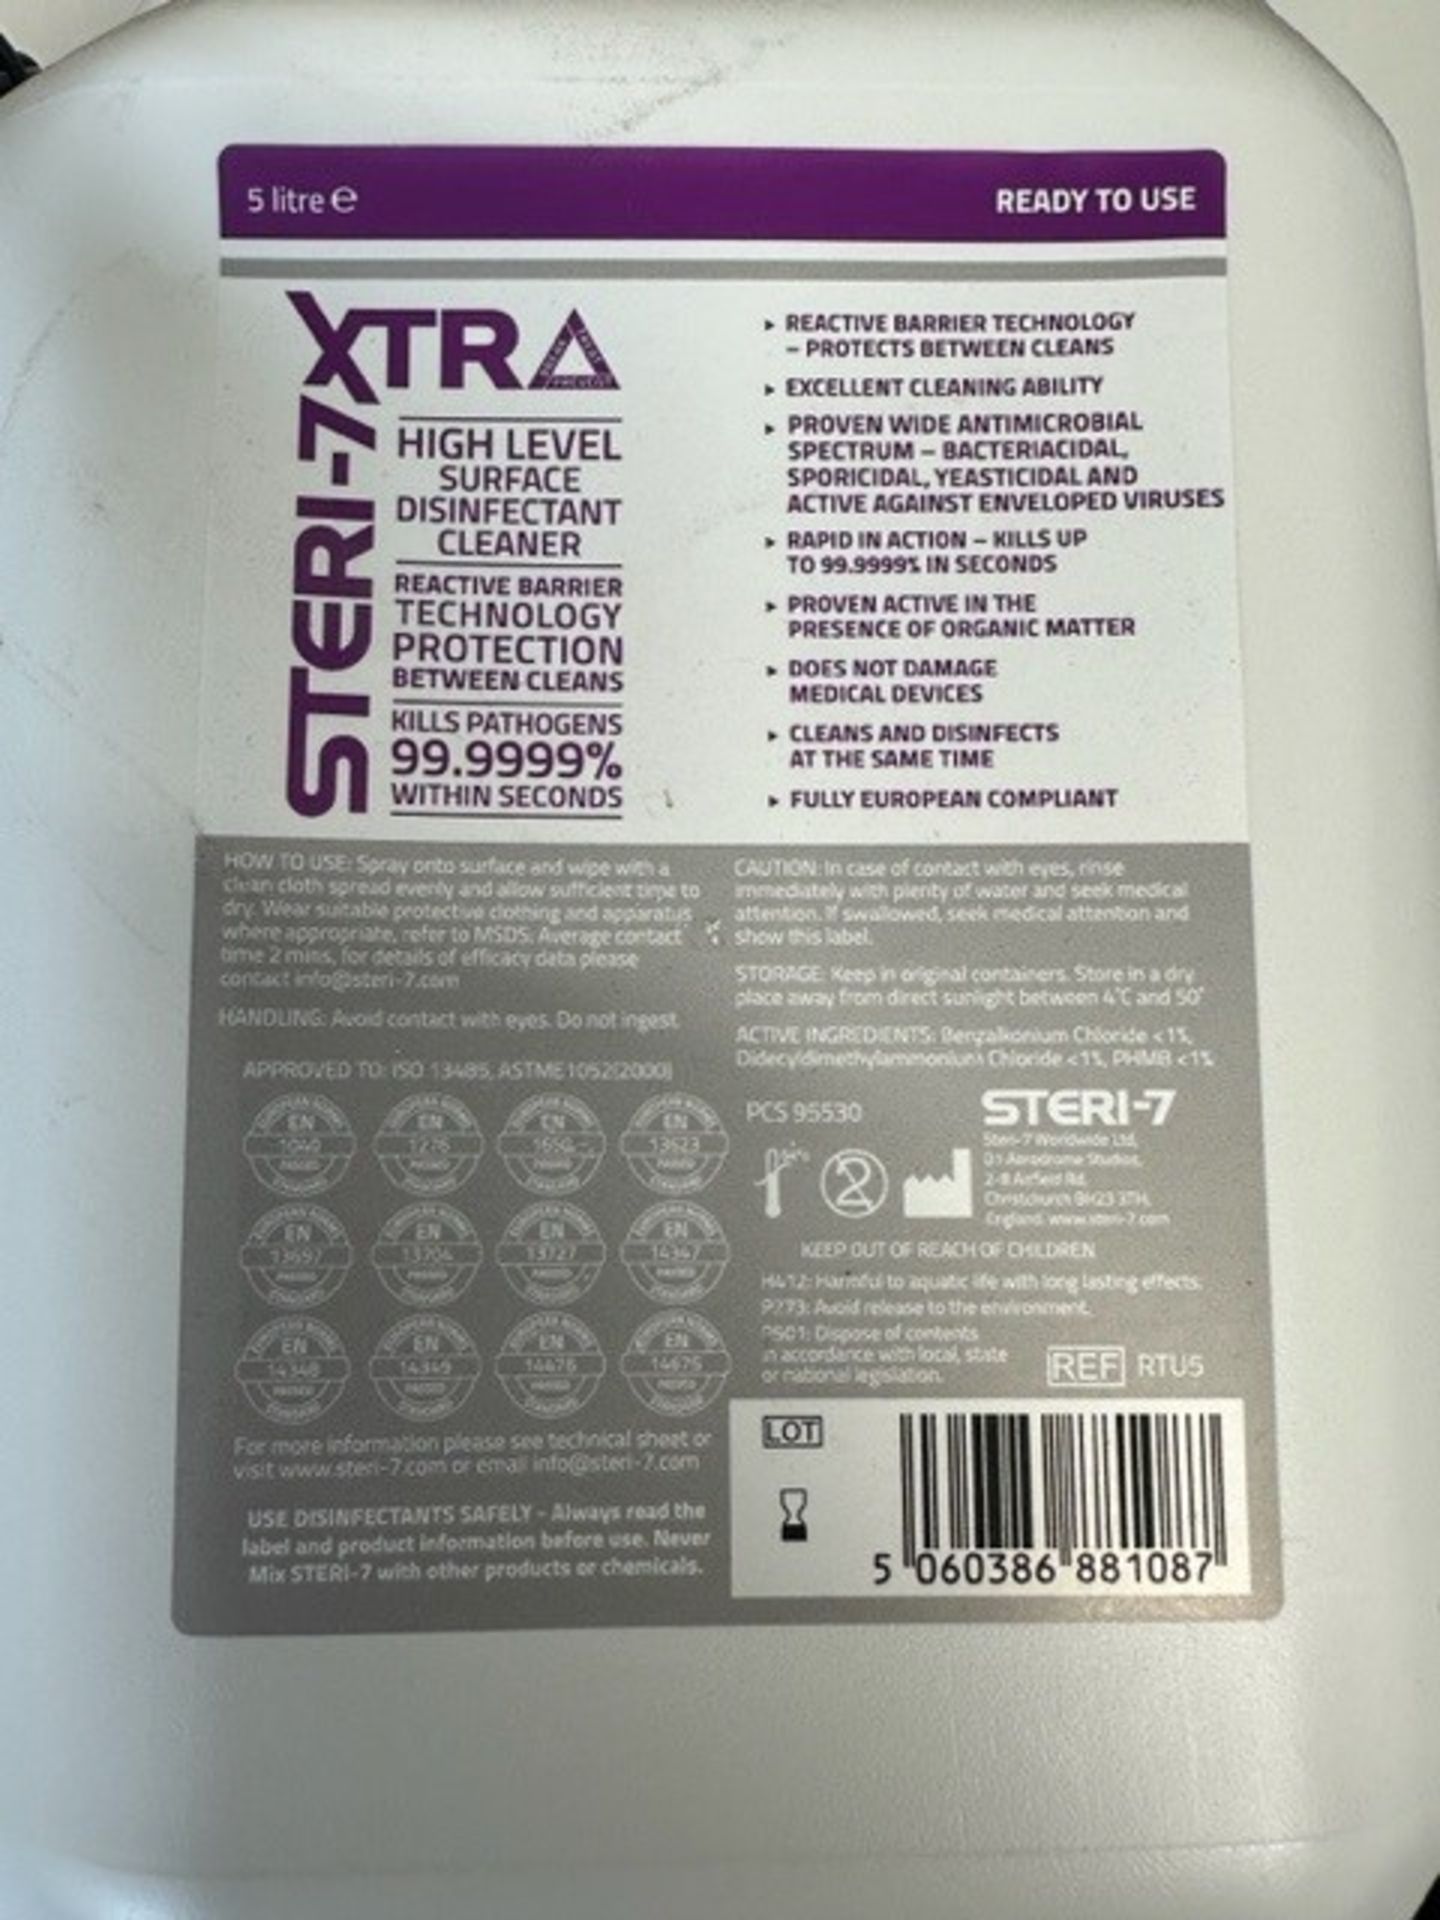 20 x Steri-7 5L Bottles of Xtra High Level Surface Disinfectant Cleaner - Ready to Use (5 outer - Image 2 of 12